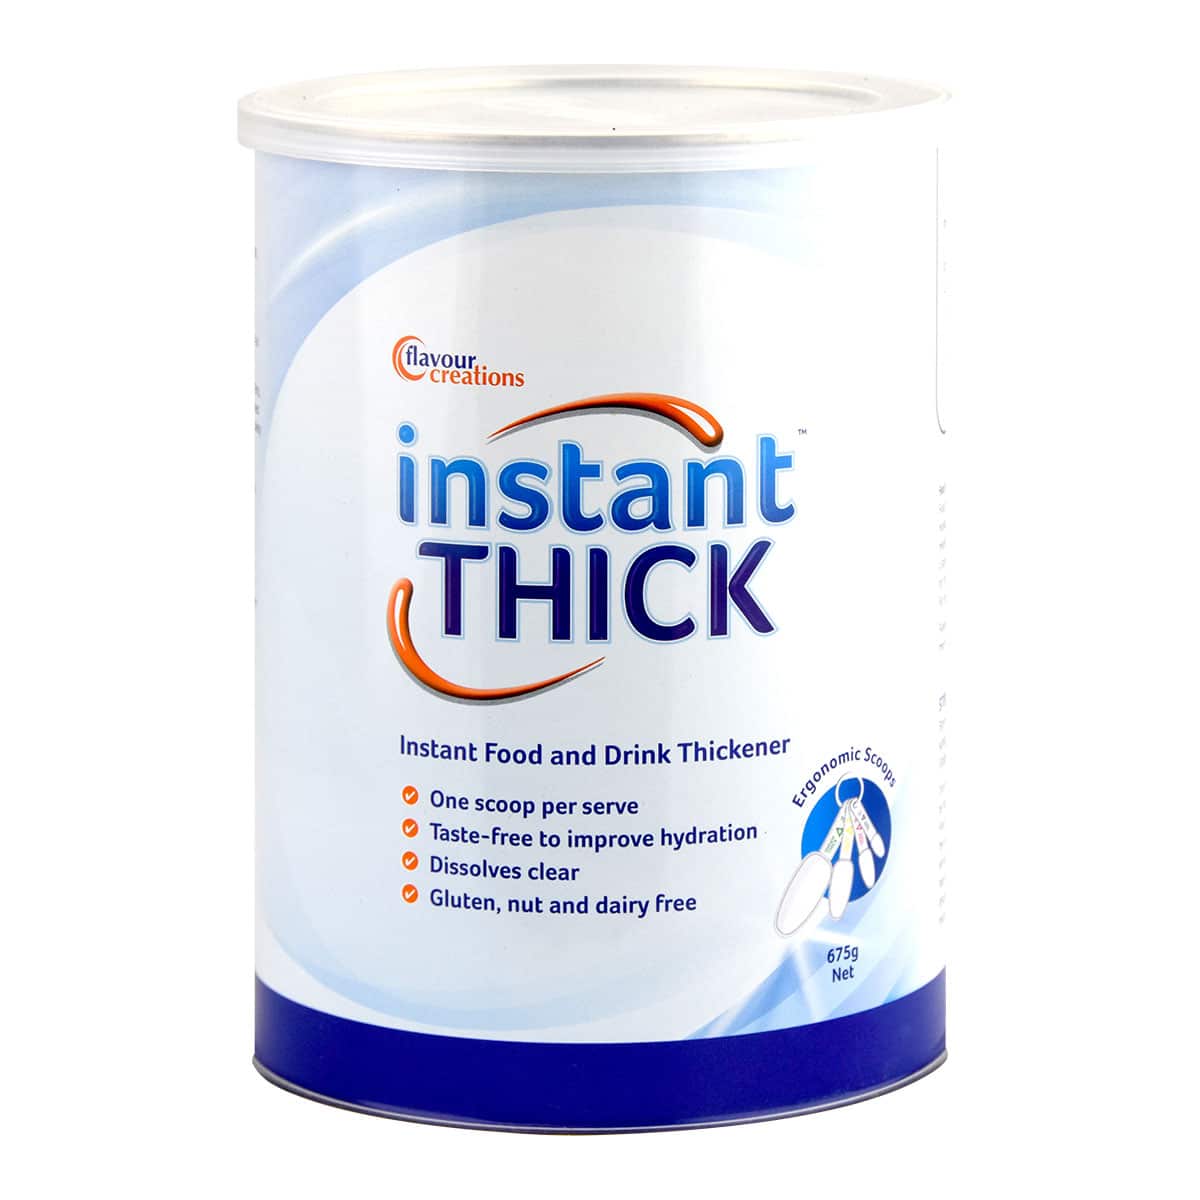 Instant Thick Ultimate Thickening Powder